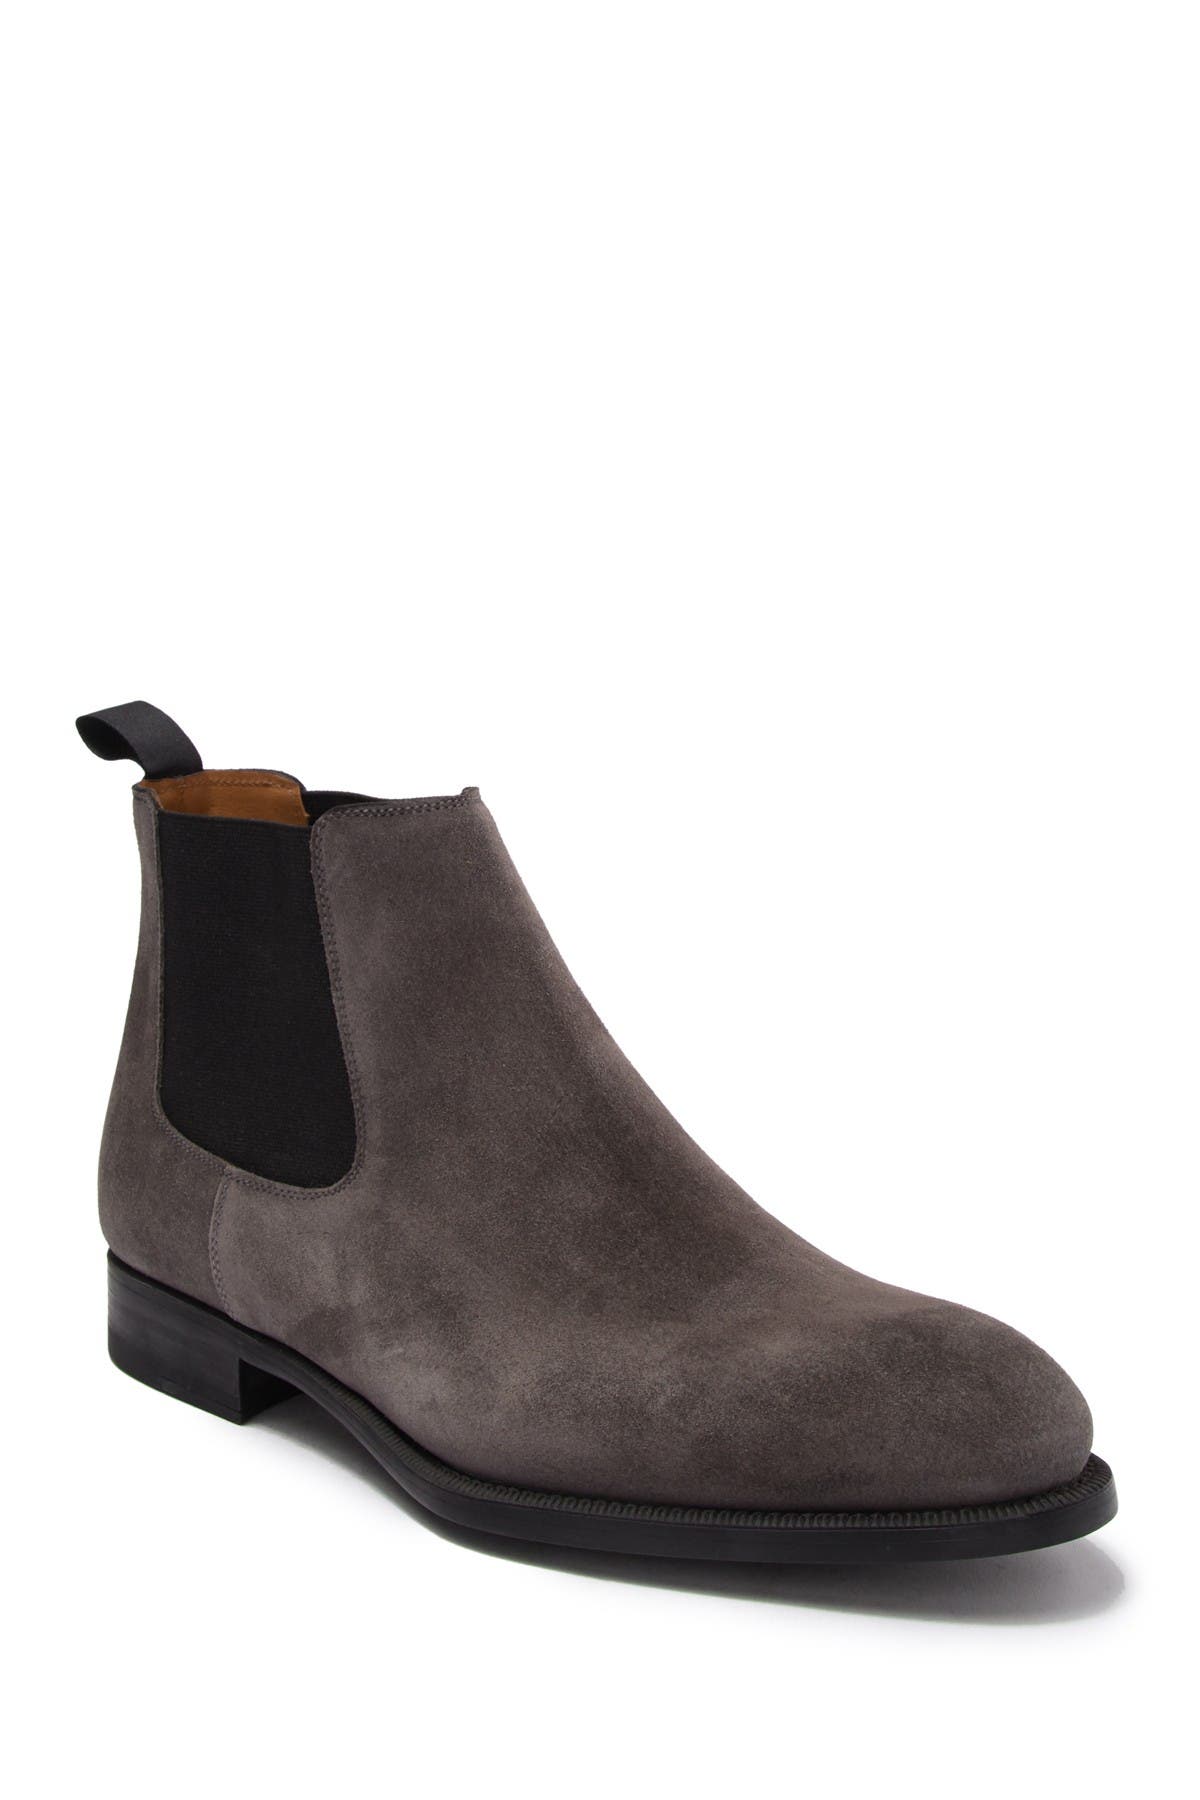 Magnanni | Foster Suede Chelsea Boot 